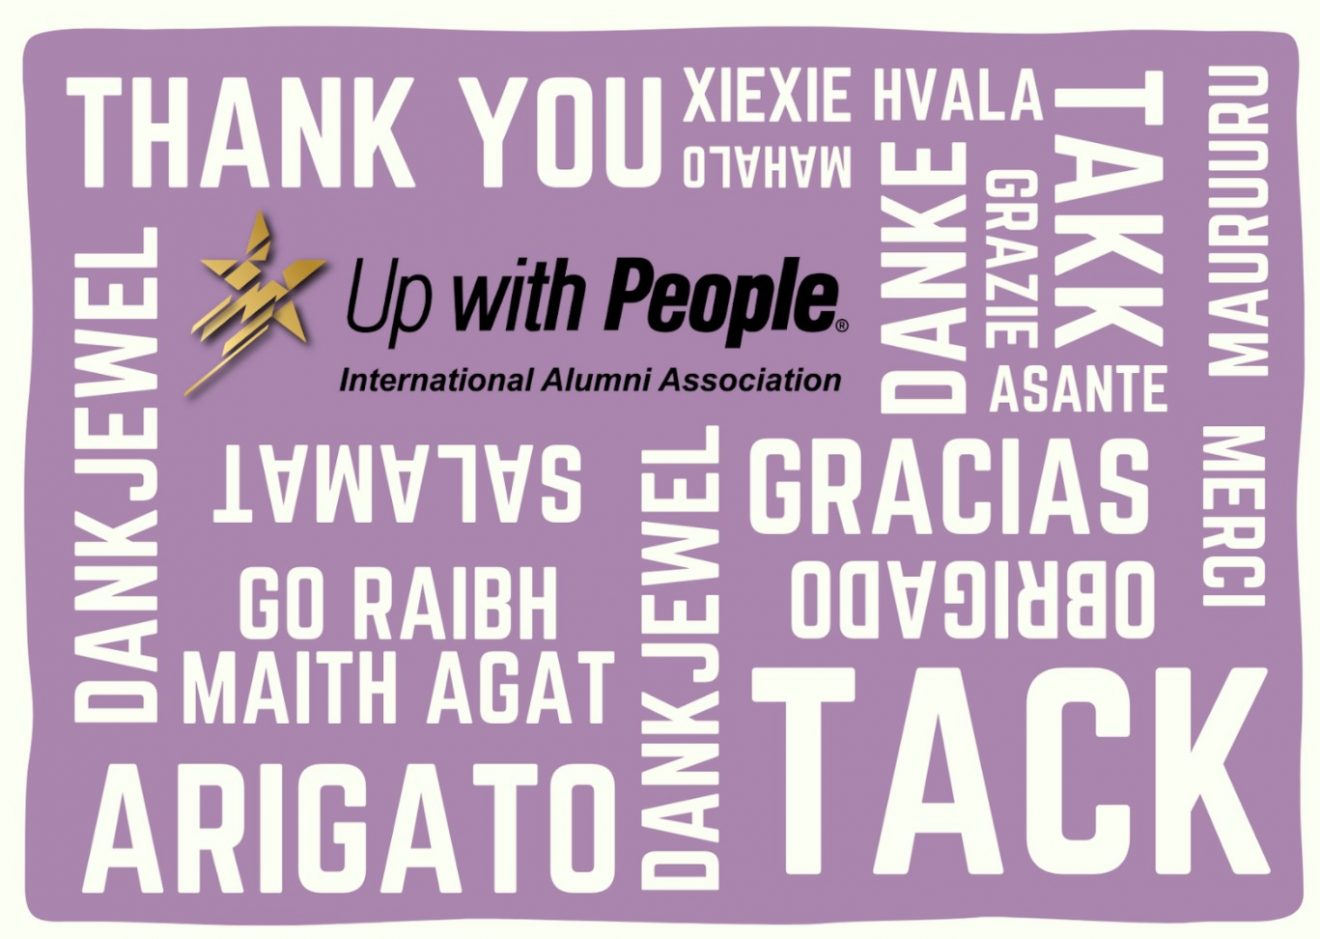 Word Cloud of Thank You in many languages around the UWPIAA logo. Words are in white and the background is purple